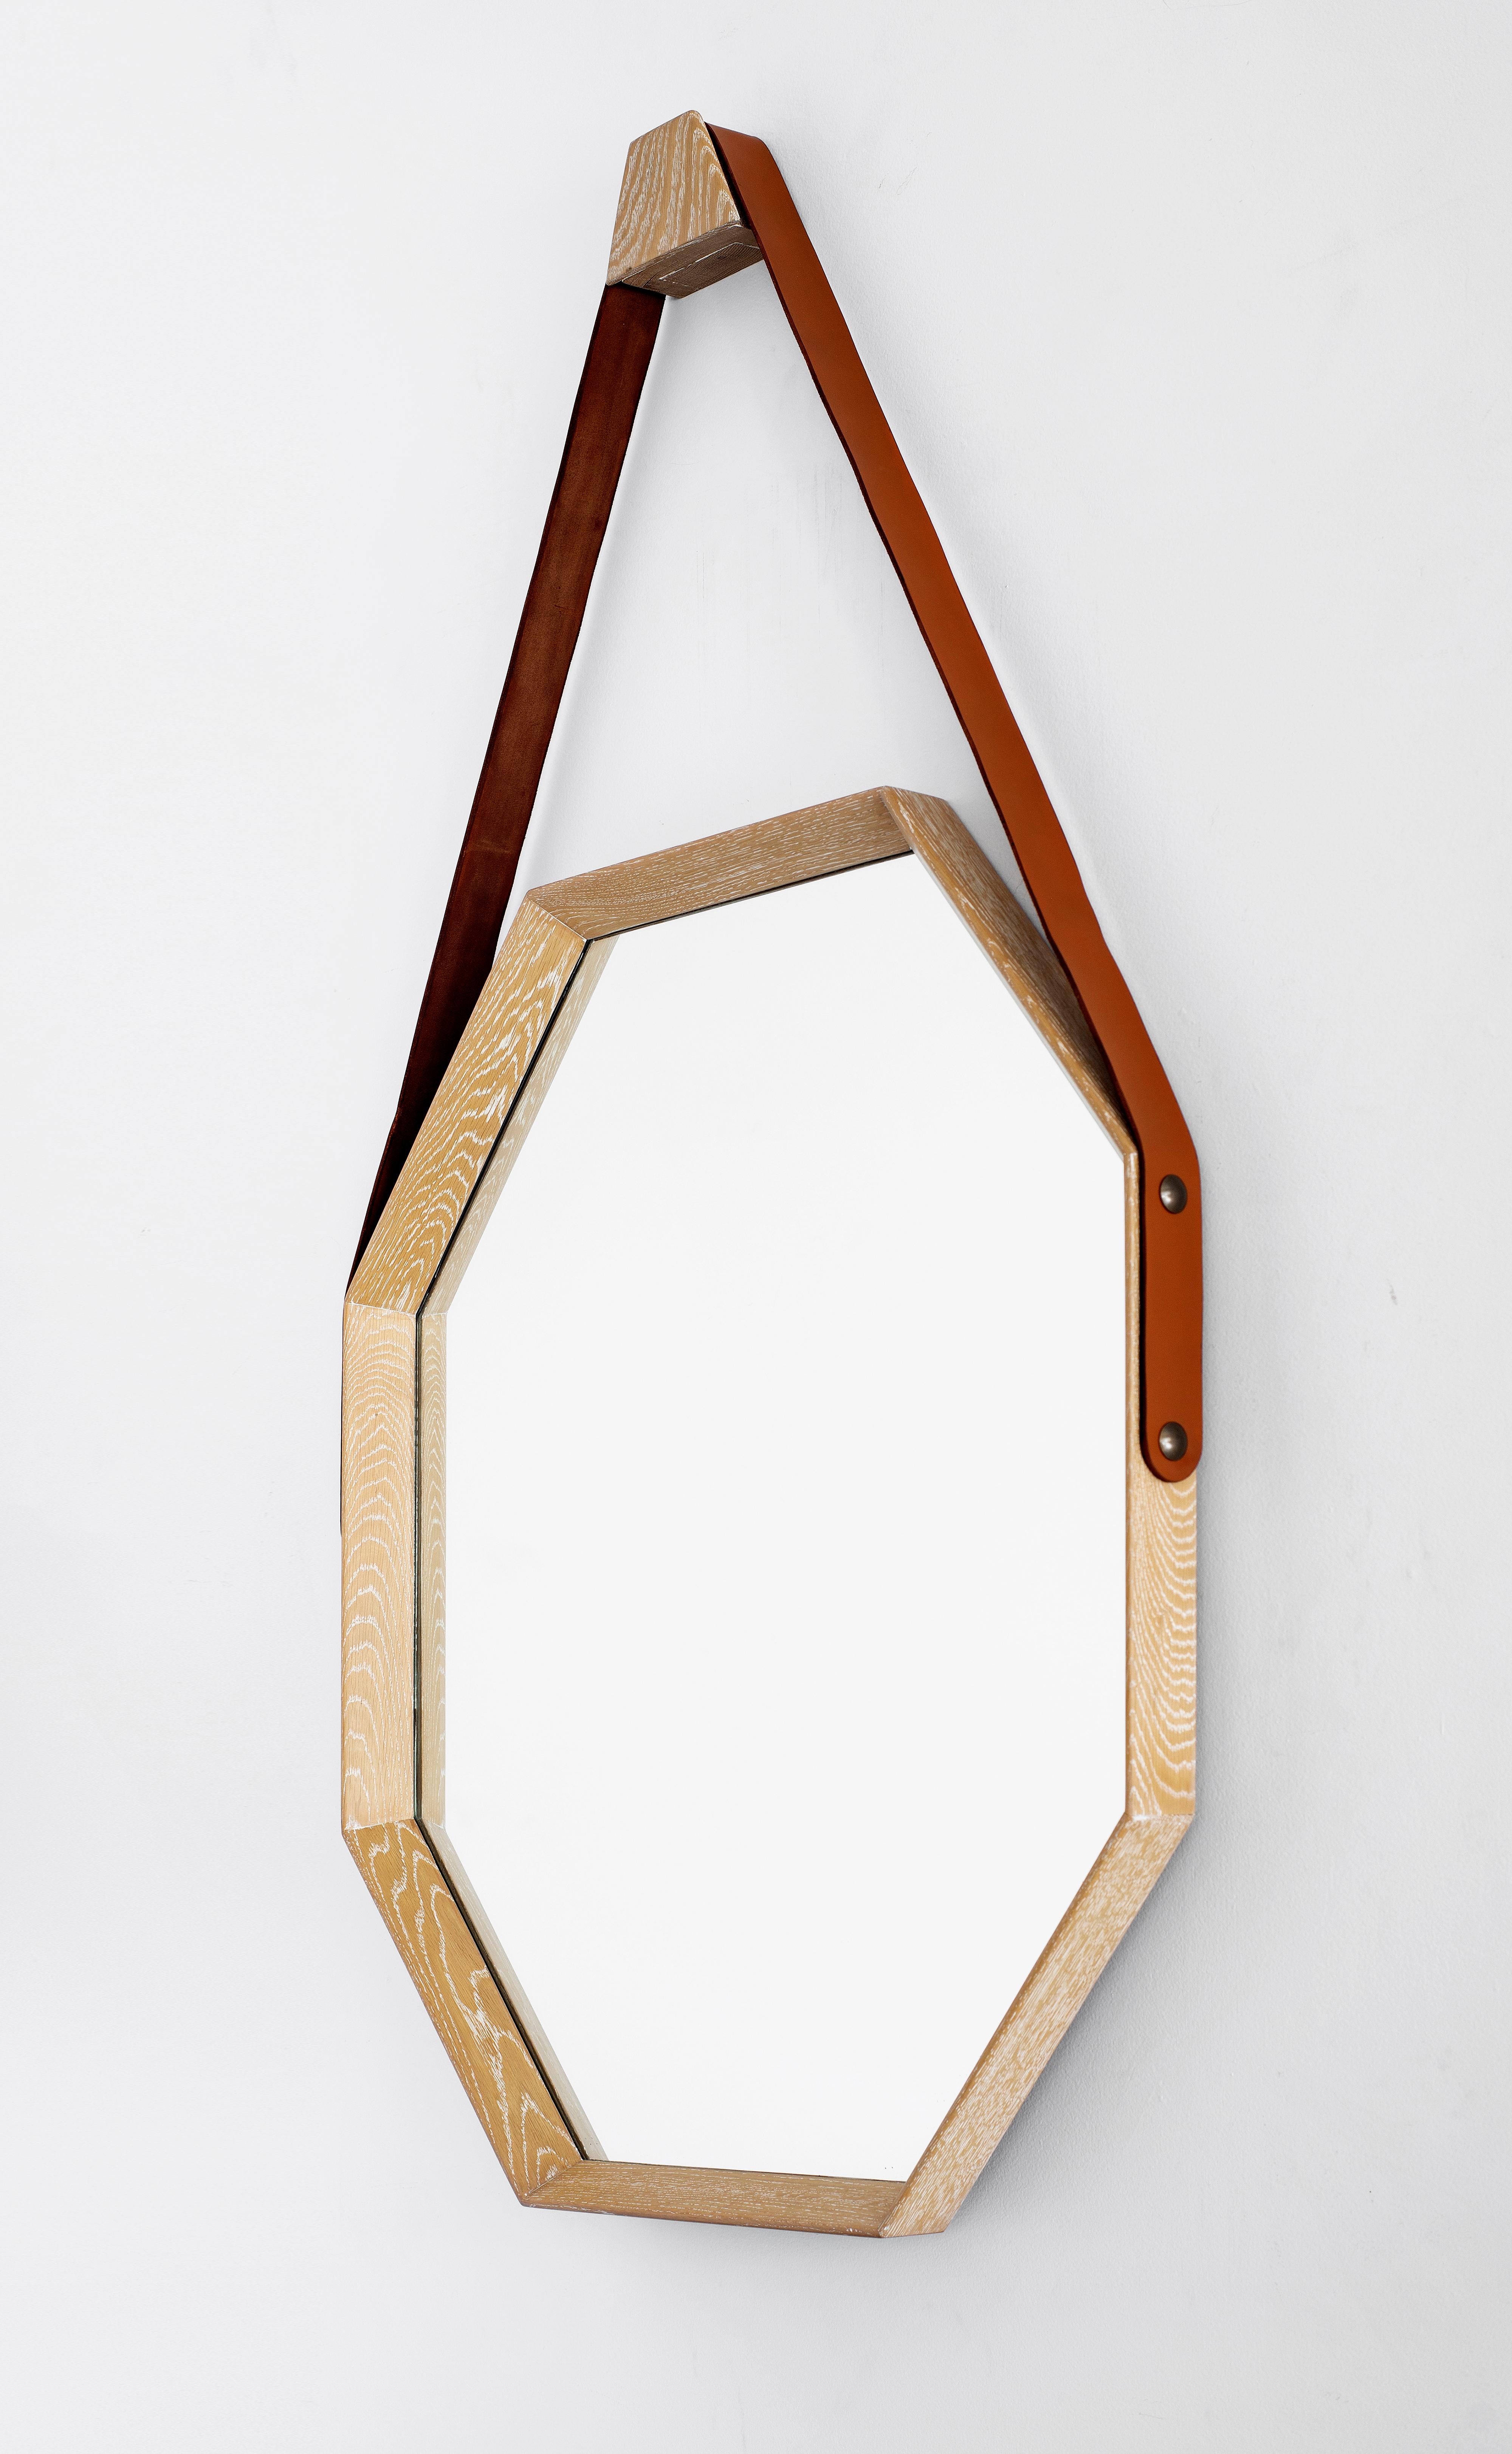 Newly produced by Orange, octagon shaped mirror with light Cerused wood finish and brown leather strap detail attached with brass studs. Multiple quantity and finishes available.

Mirror measures: 37.5